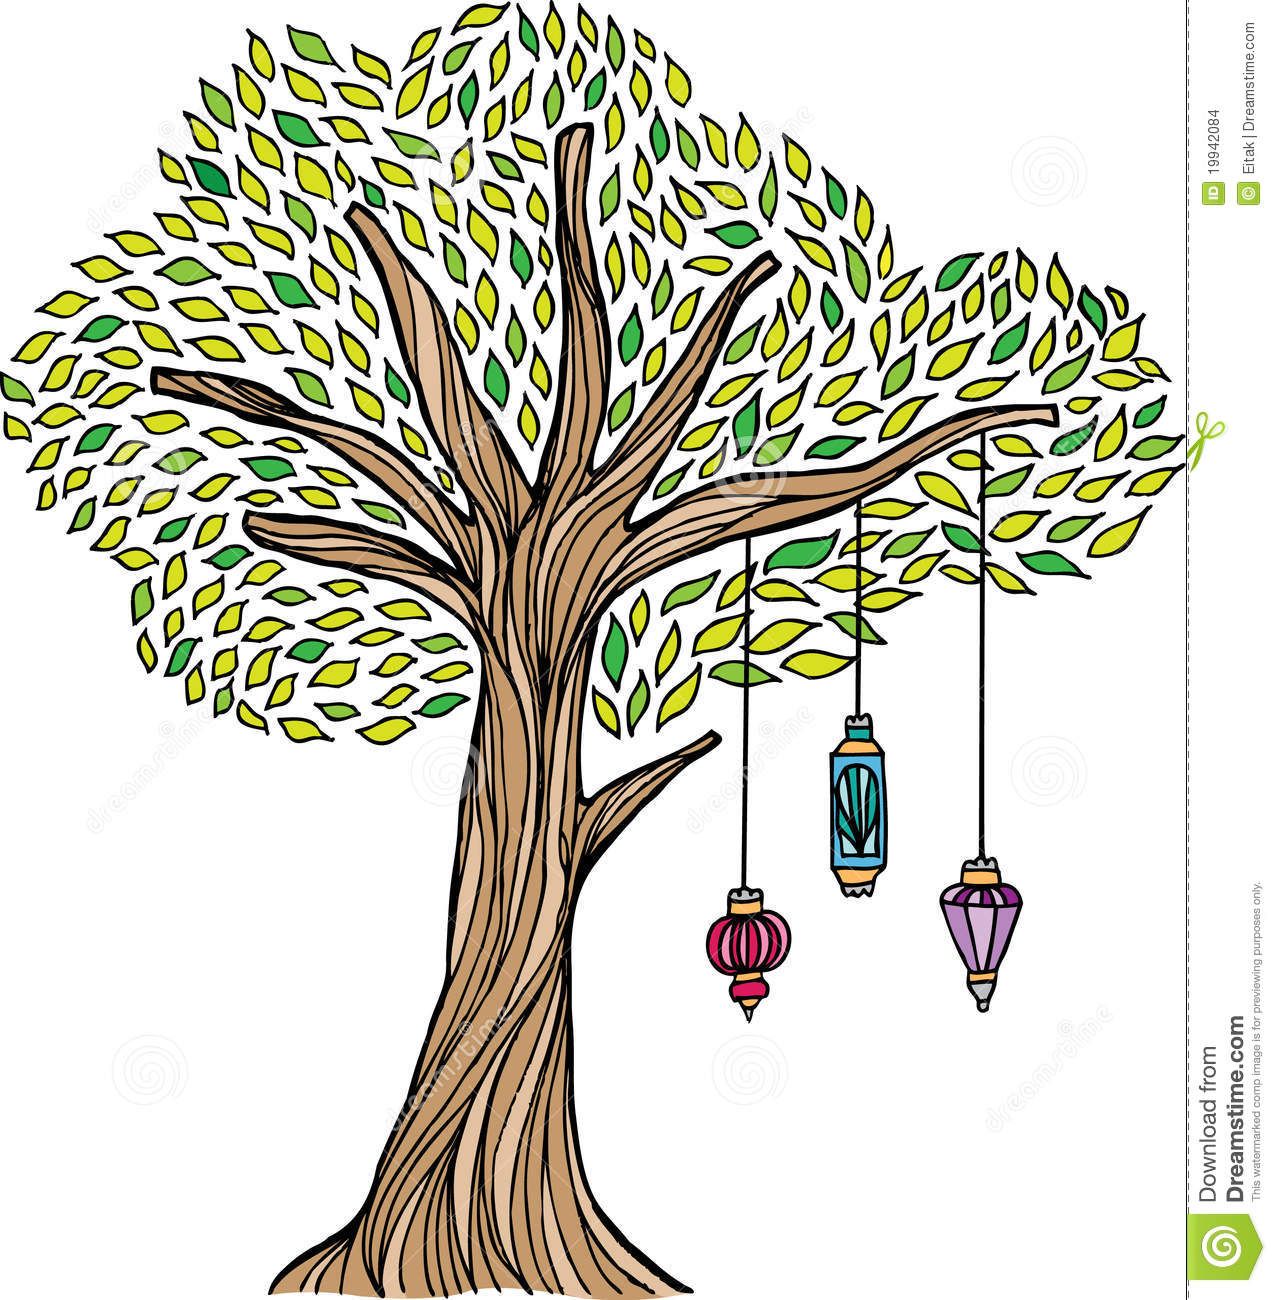 Whimsical tree with.